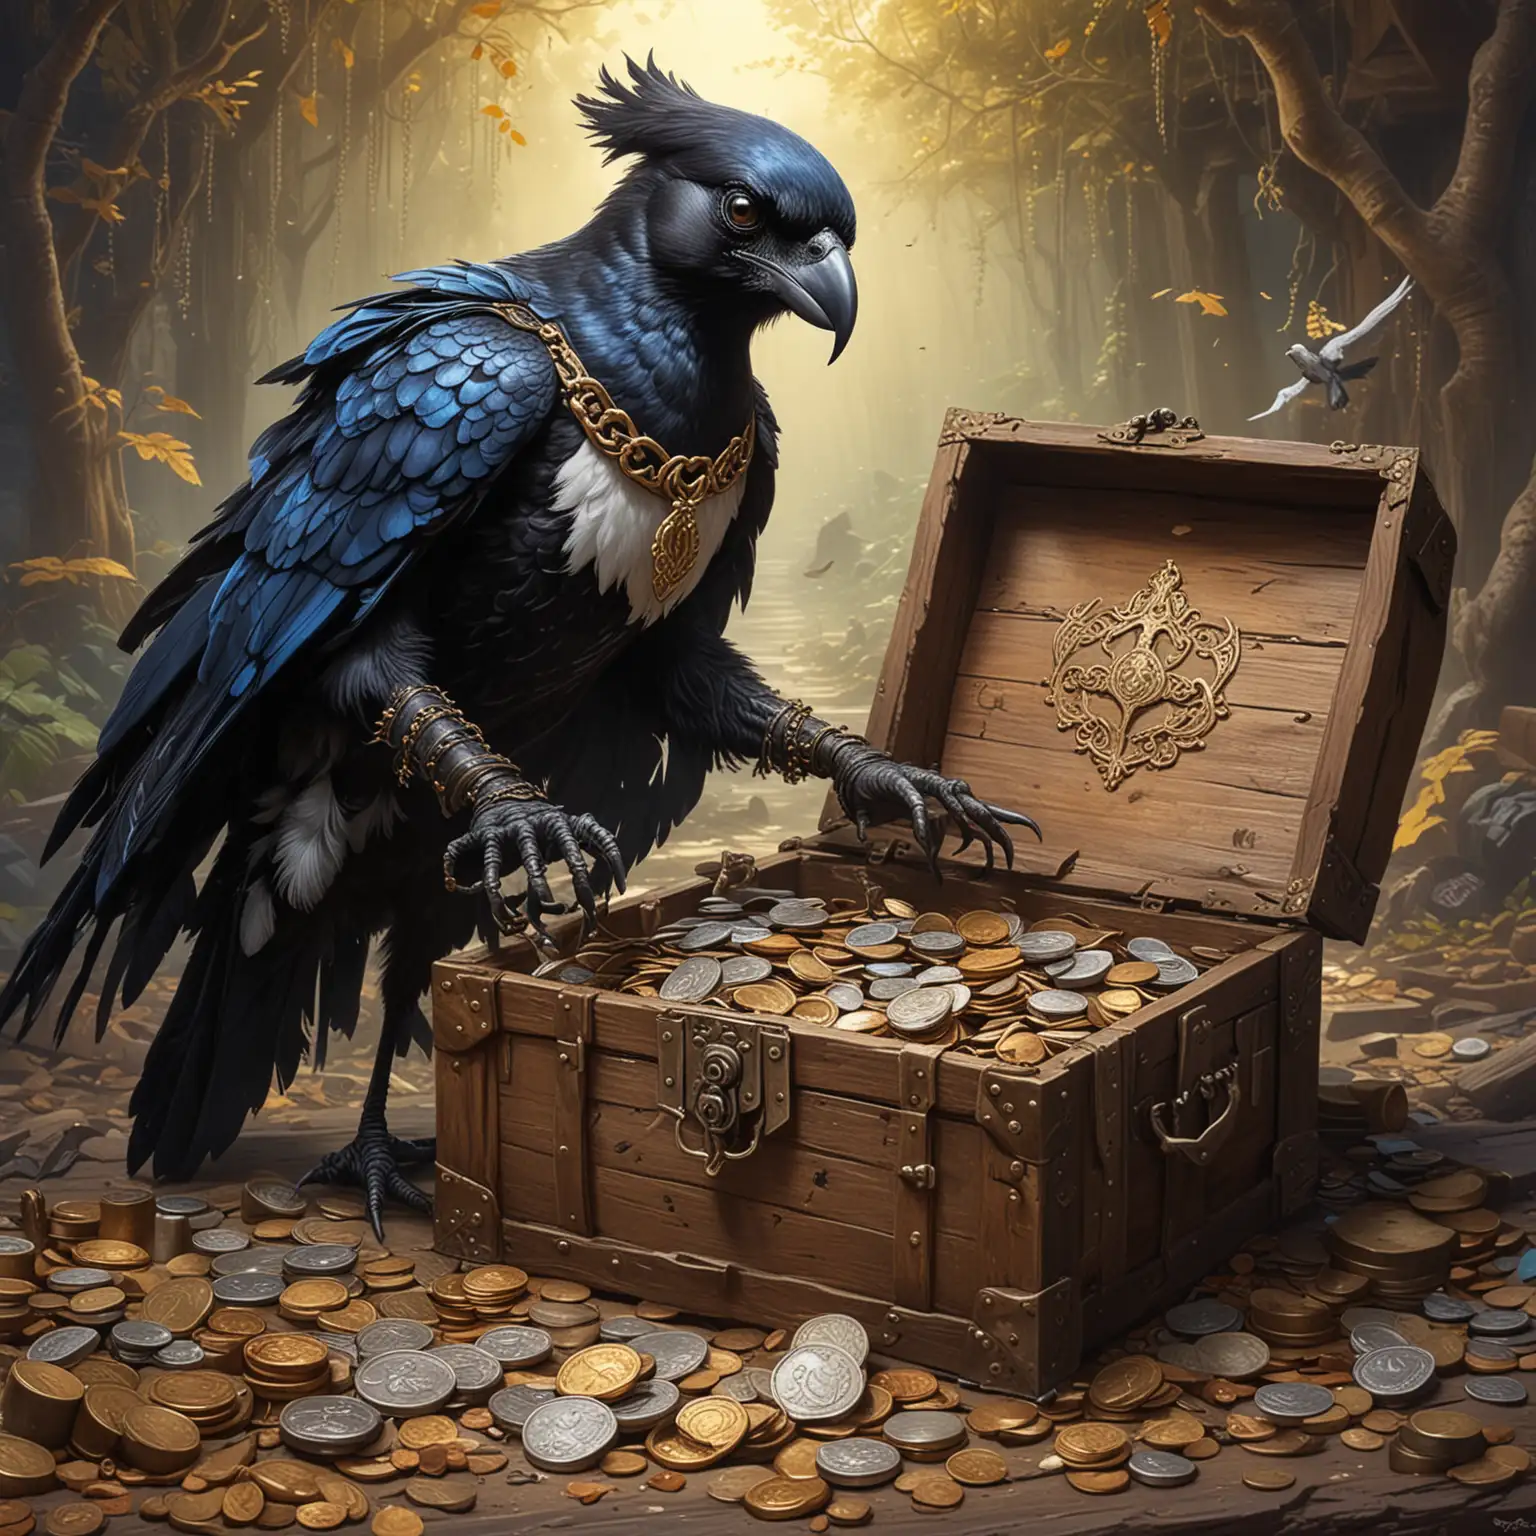 humanoid magpie, thief,  opening treasure chest, treasure trove full of coins, fantasy painting